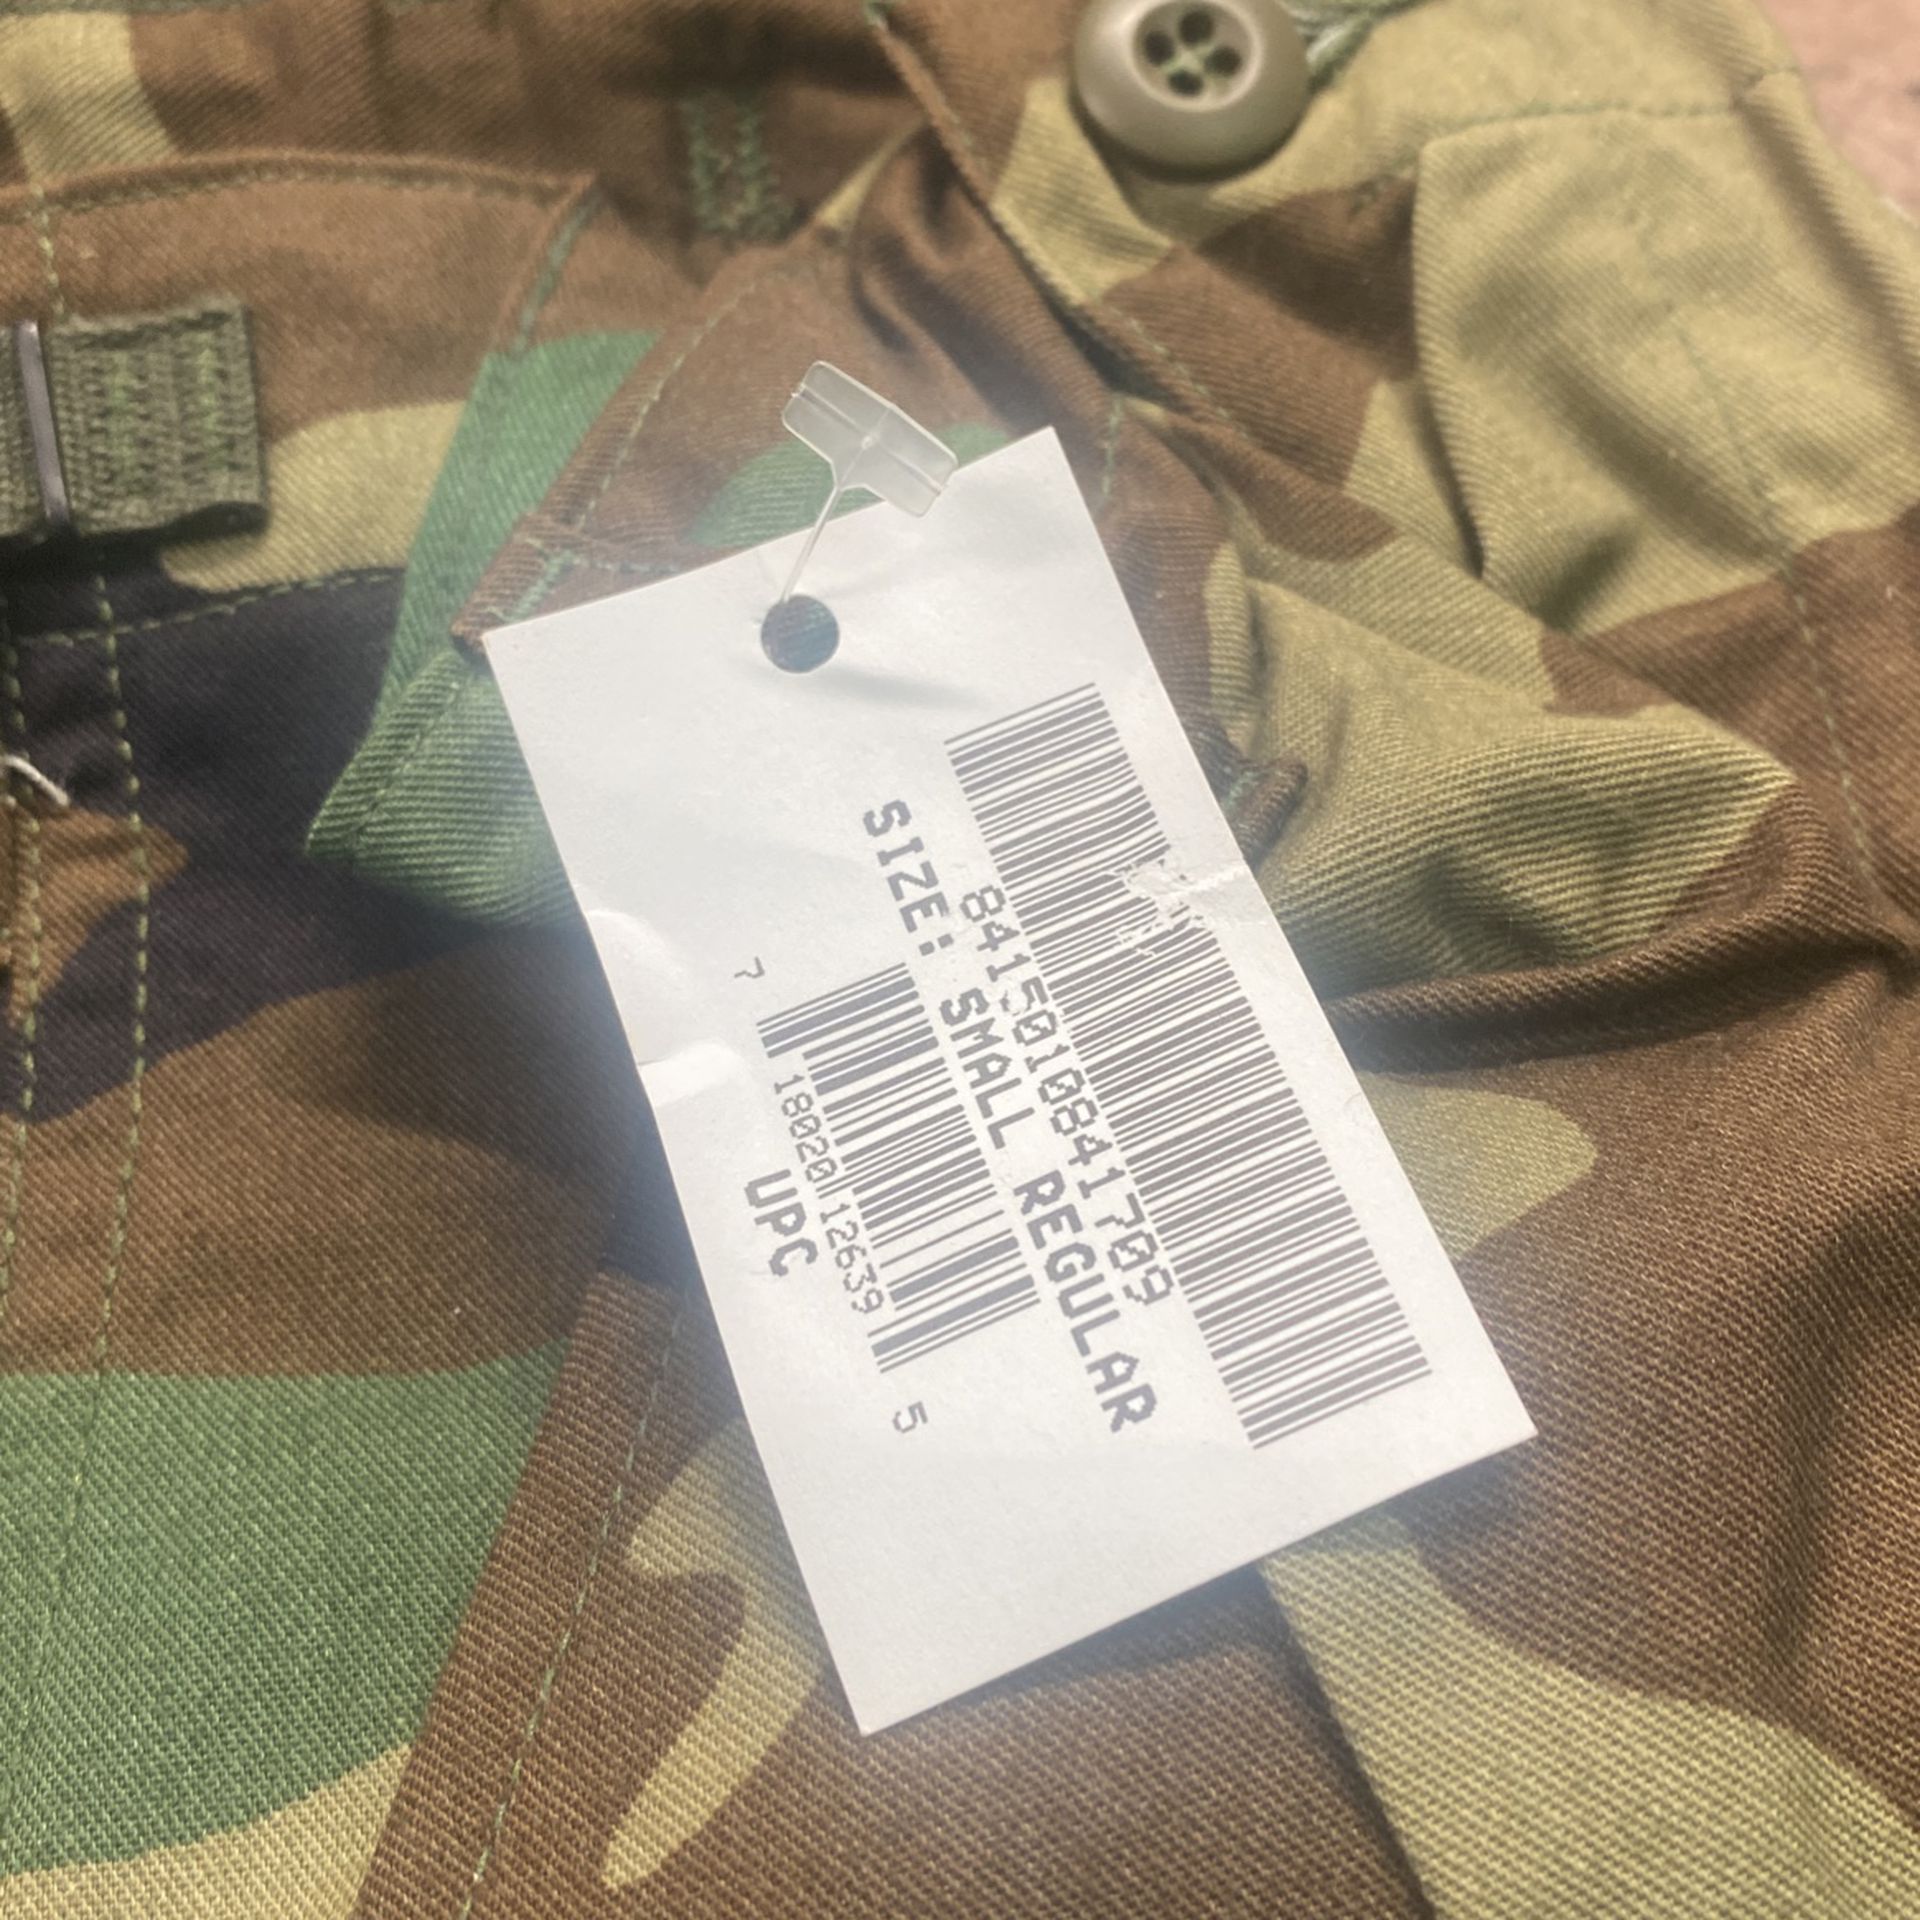 Army Issues Camo Pants